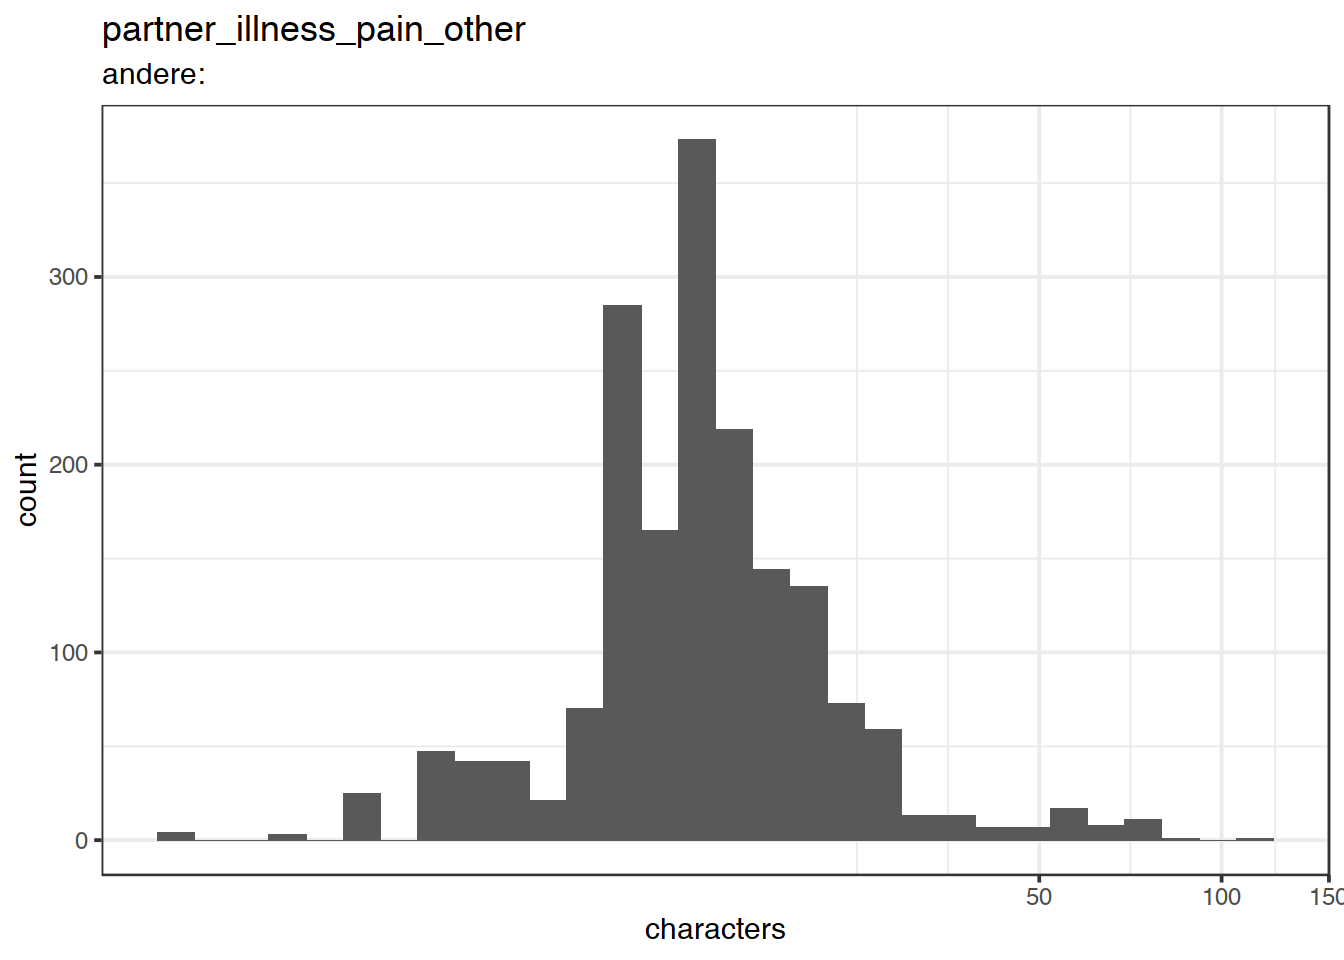 Distribution of values for partner_illness_pain_other